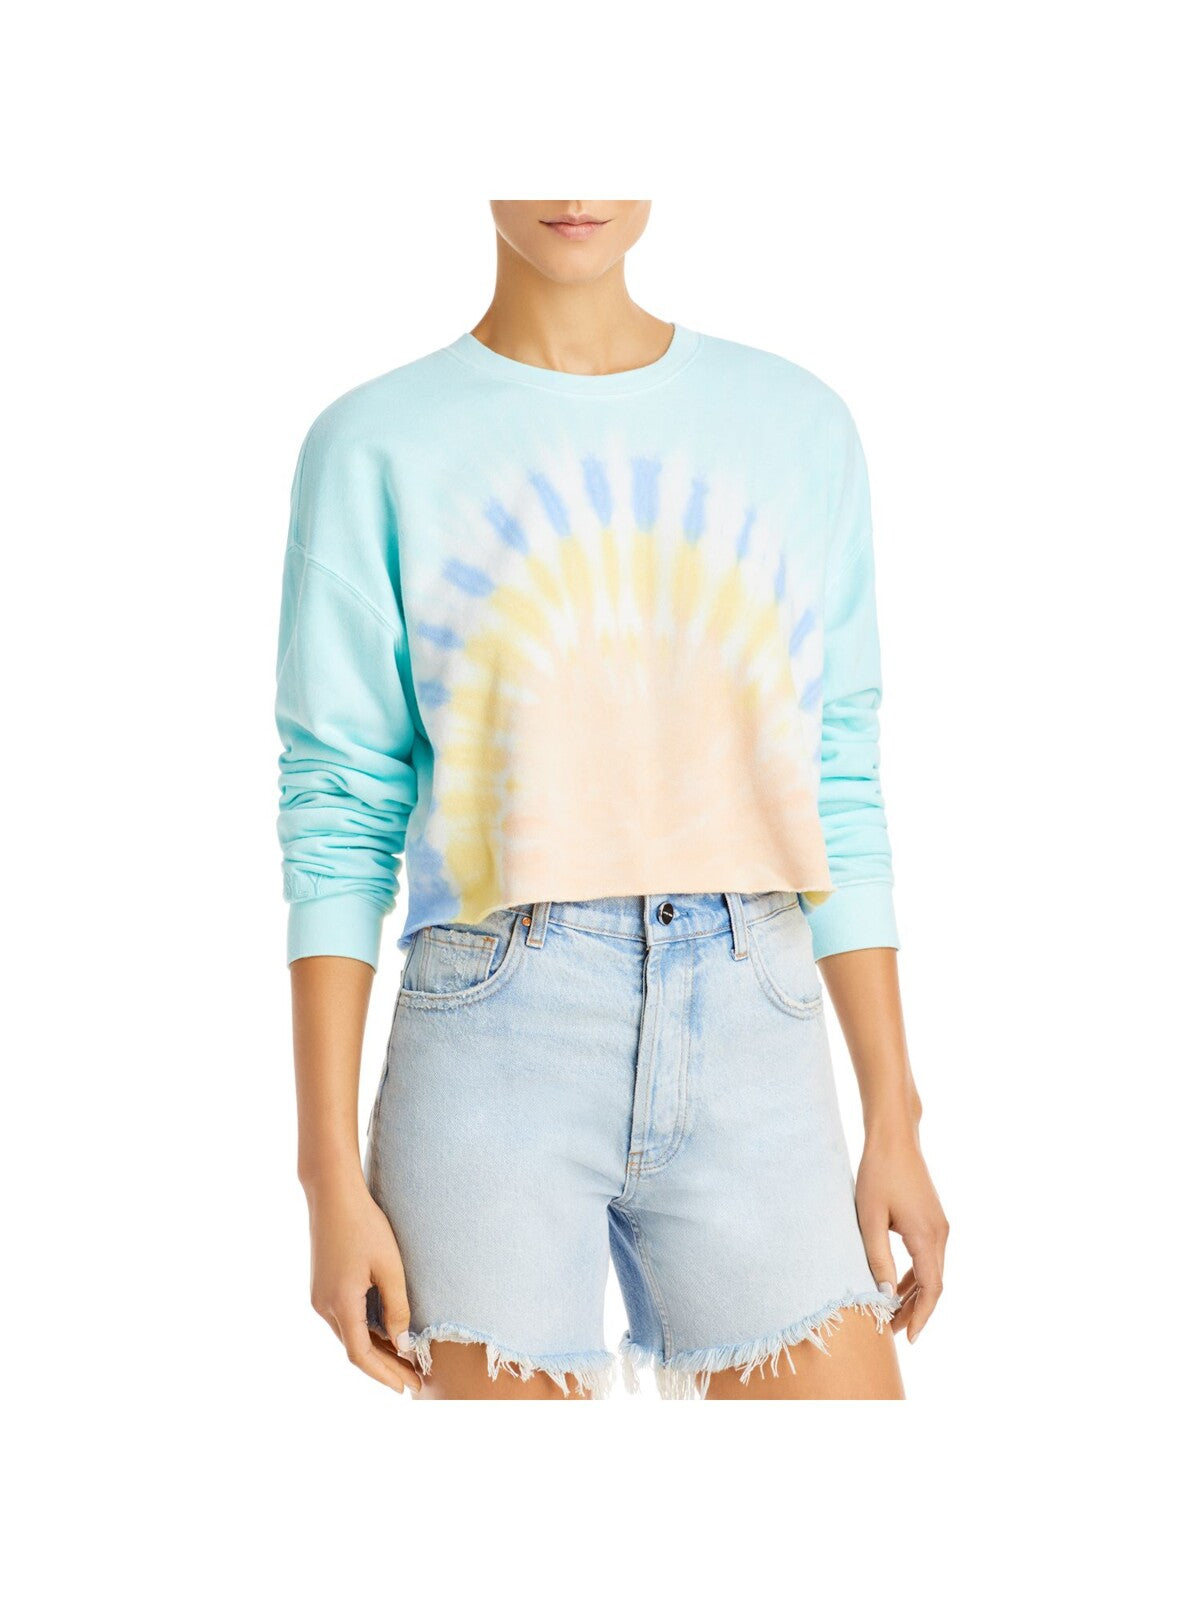 WSLY Womens Light Blue Ribbed Embroidered Cropped Tie Dye Long Sleeve Crew Neck Sweatshirt XS